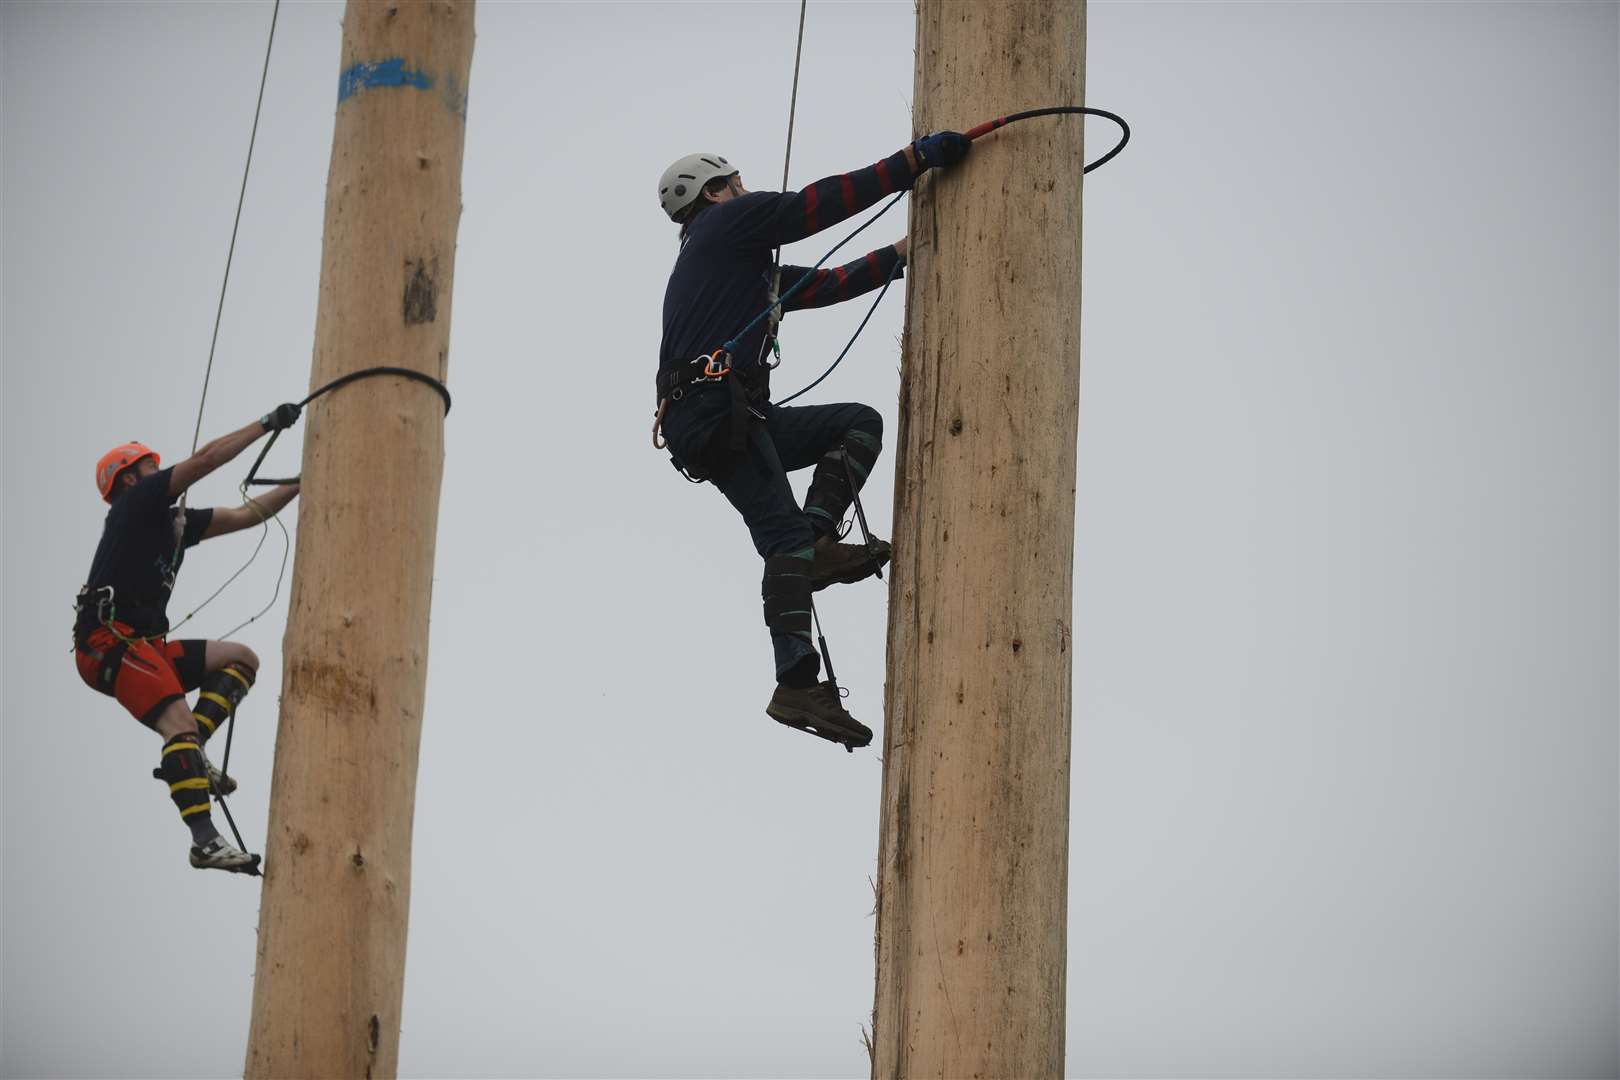 The Pole Climbing Championships debuted at the county show last year